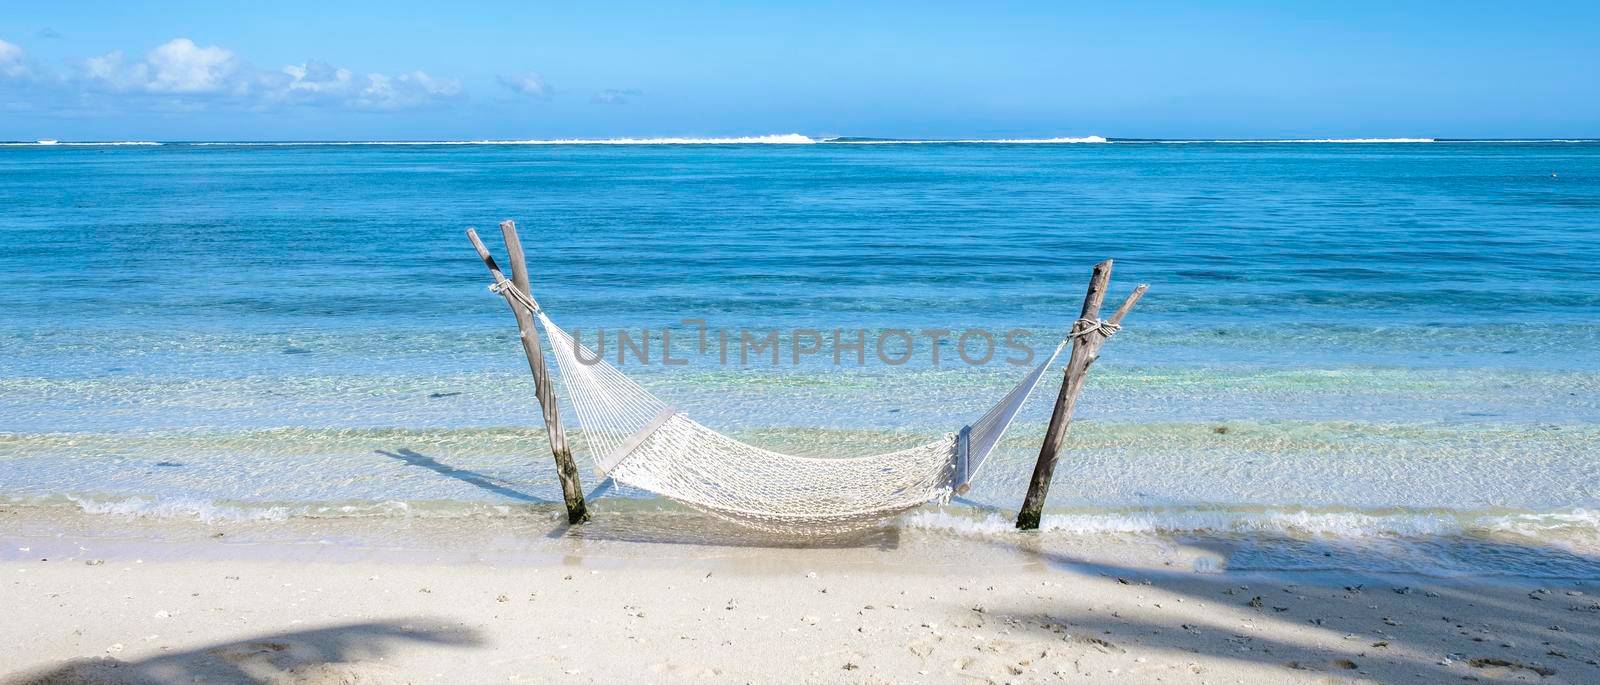 tropical beach with hammock in the ocean, white sandy beach with hammock Le Morne beach Mauritius by fokkebok